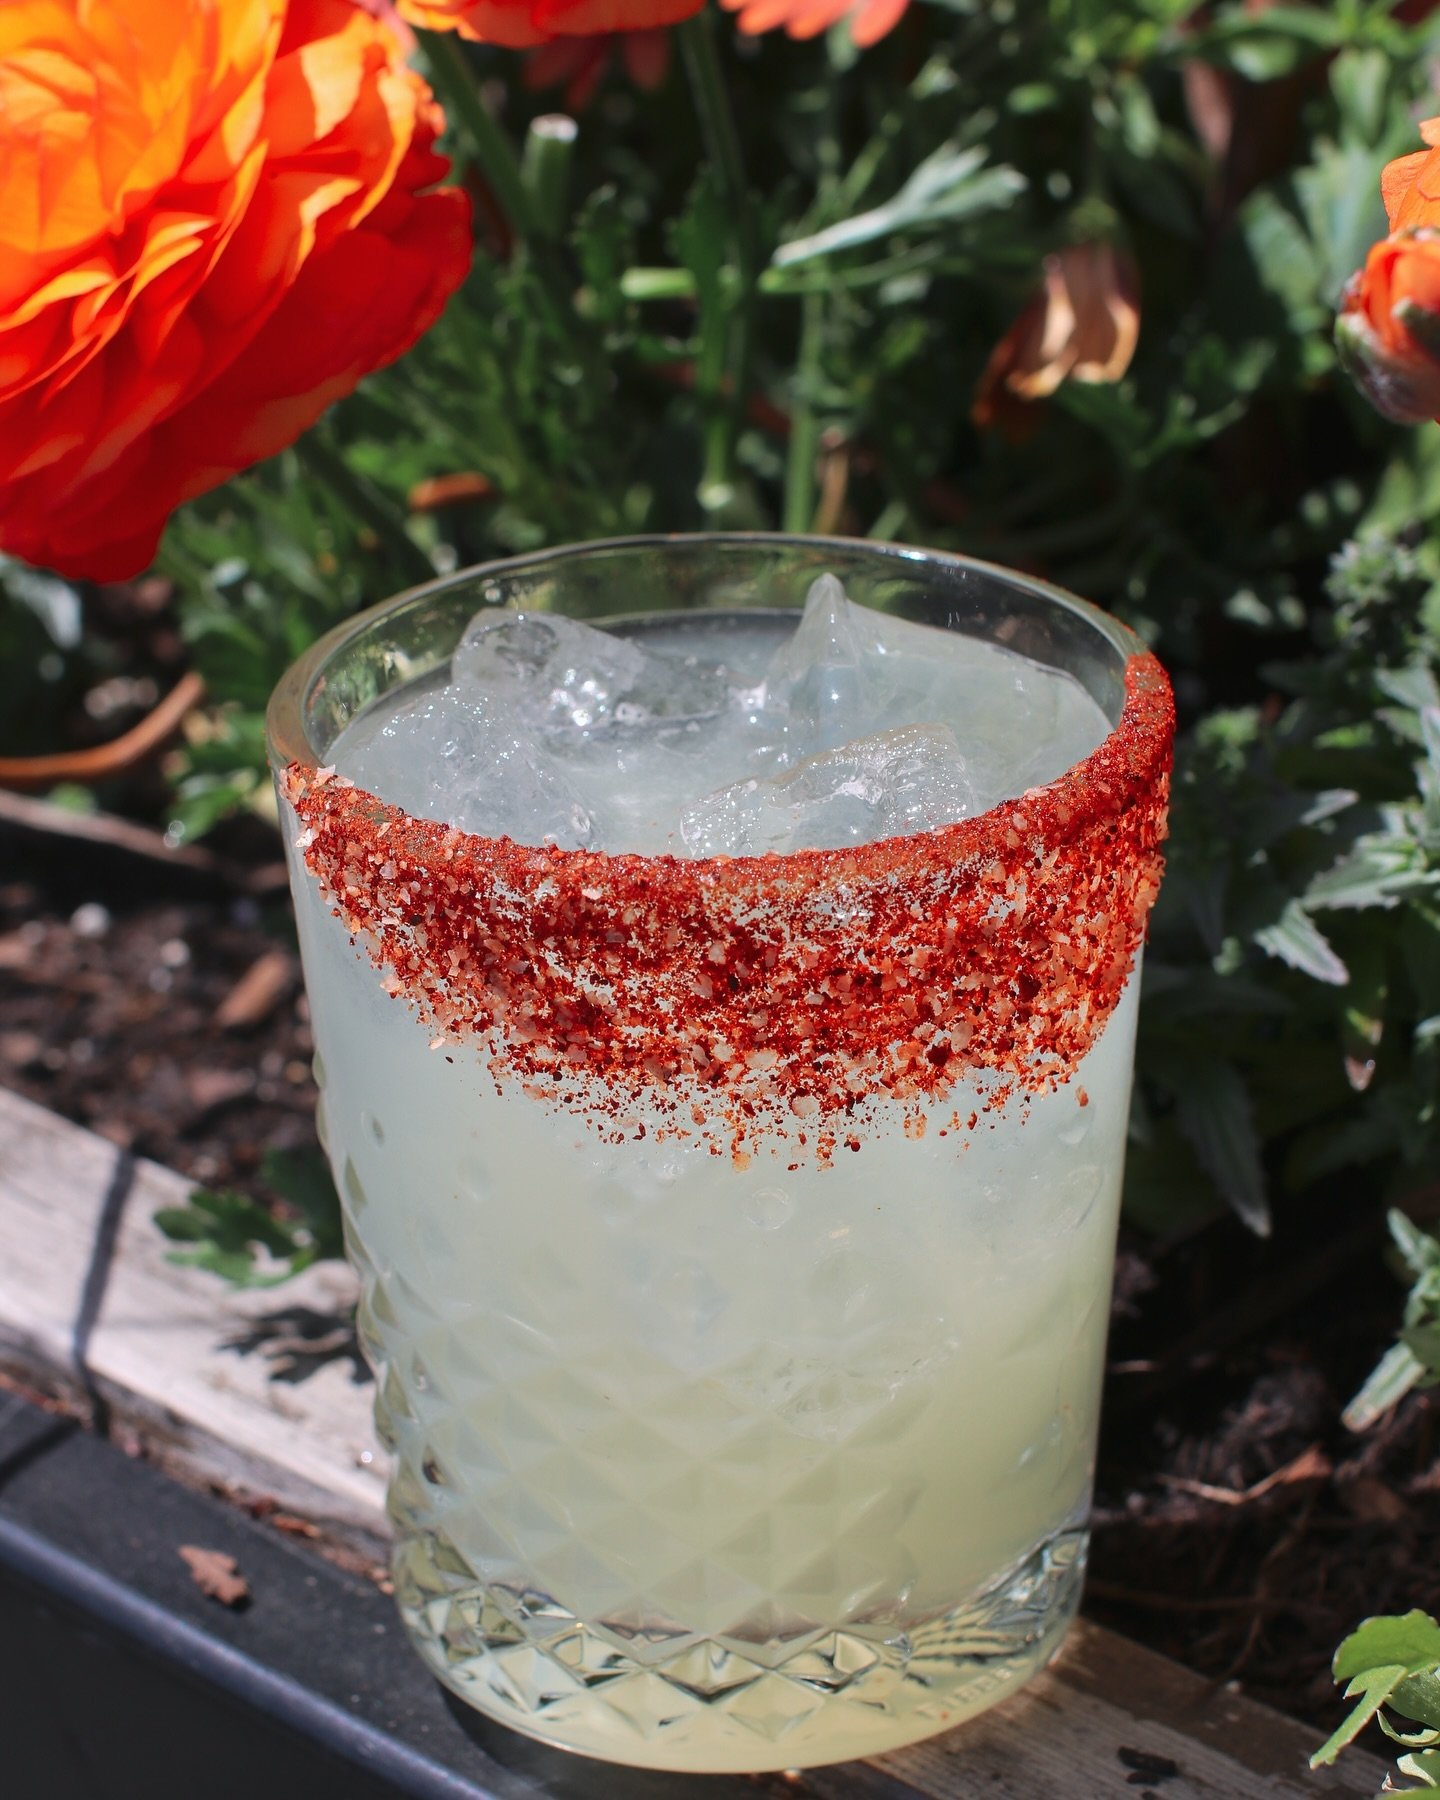 Spice up your Cinco de Mayo with our Habanero Margarita 🌶️🍹